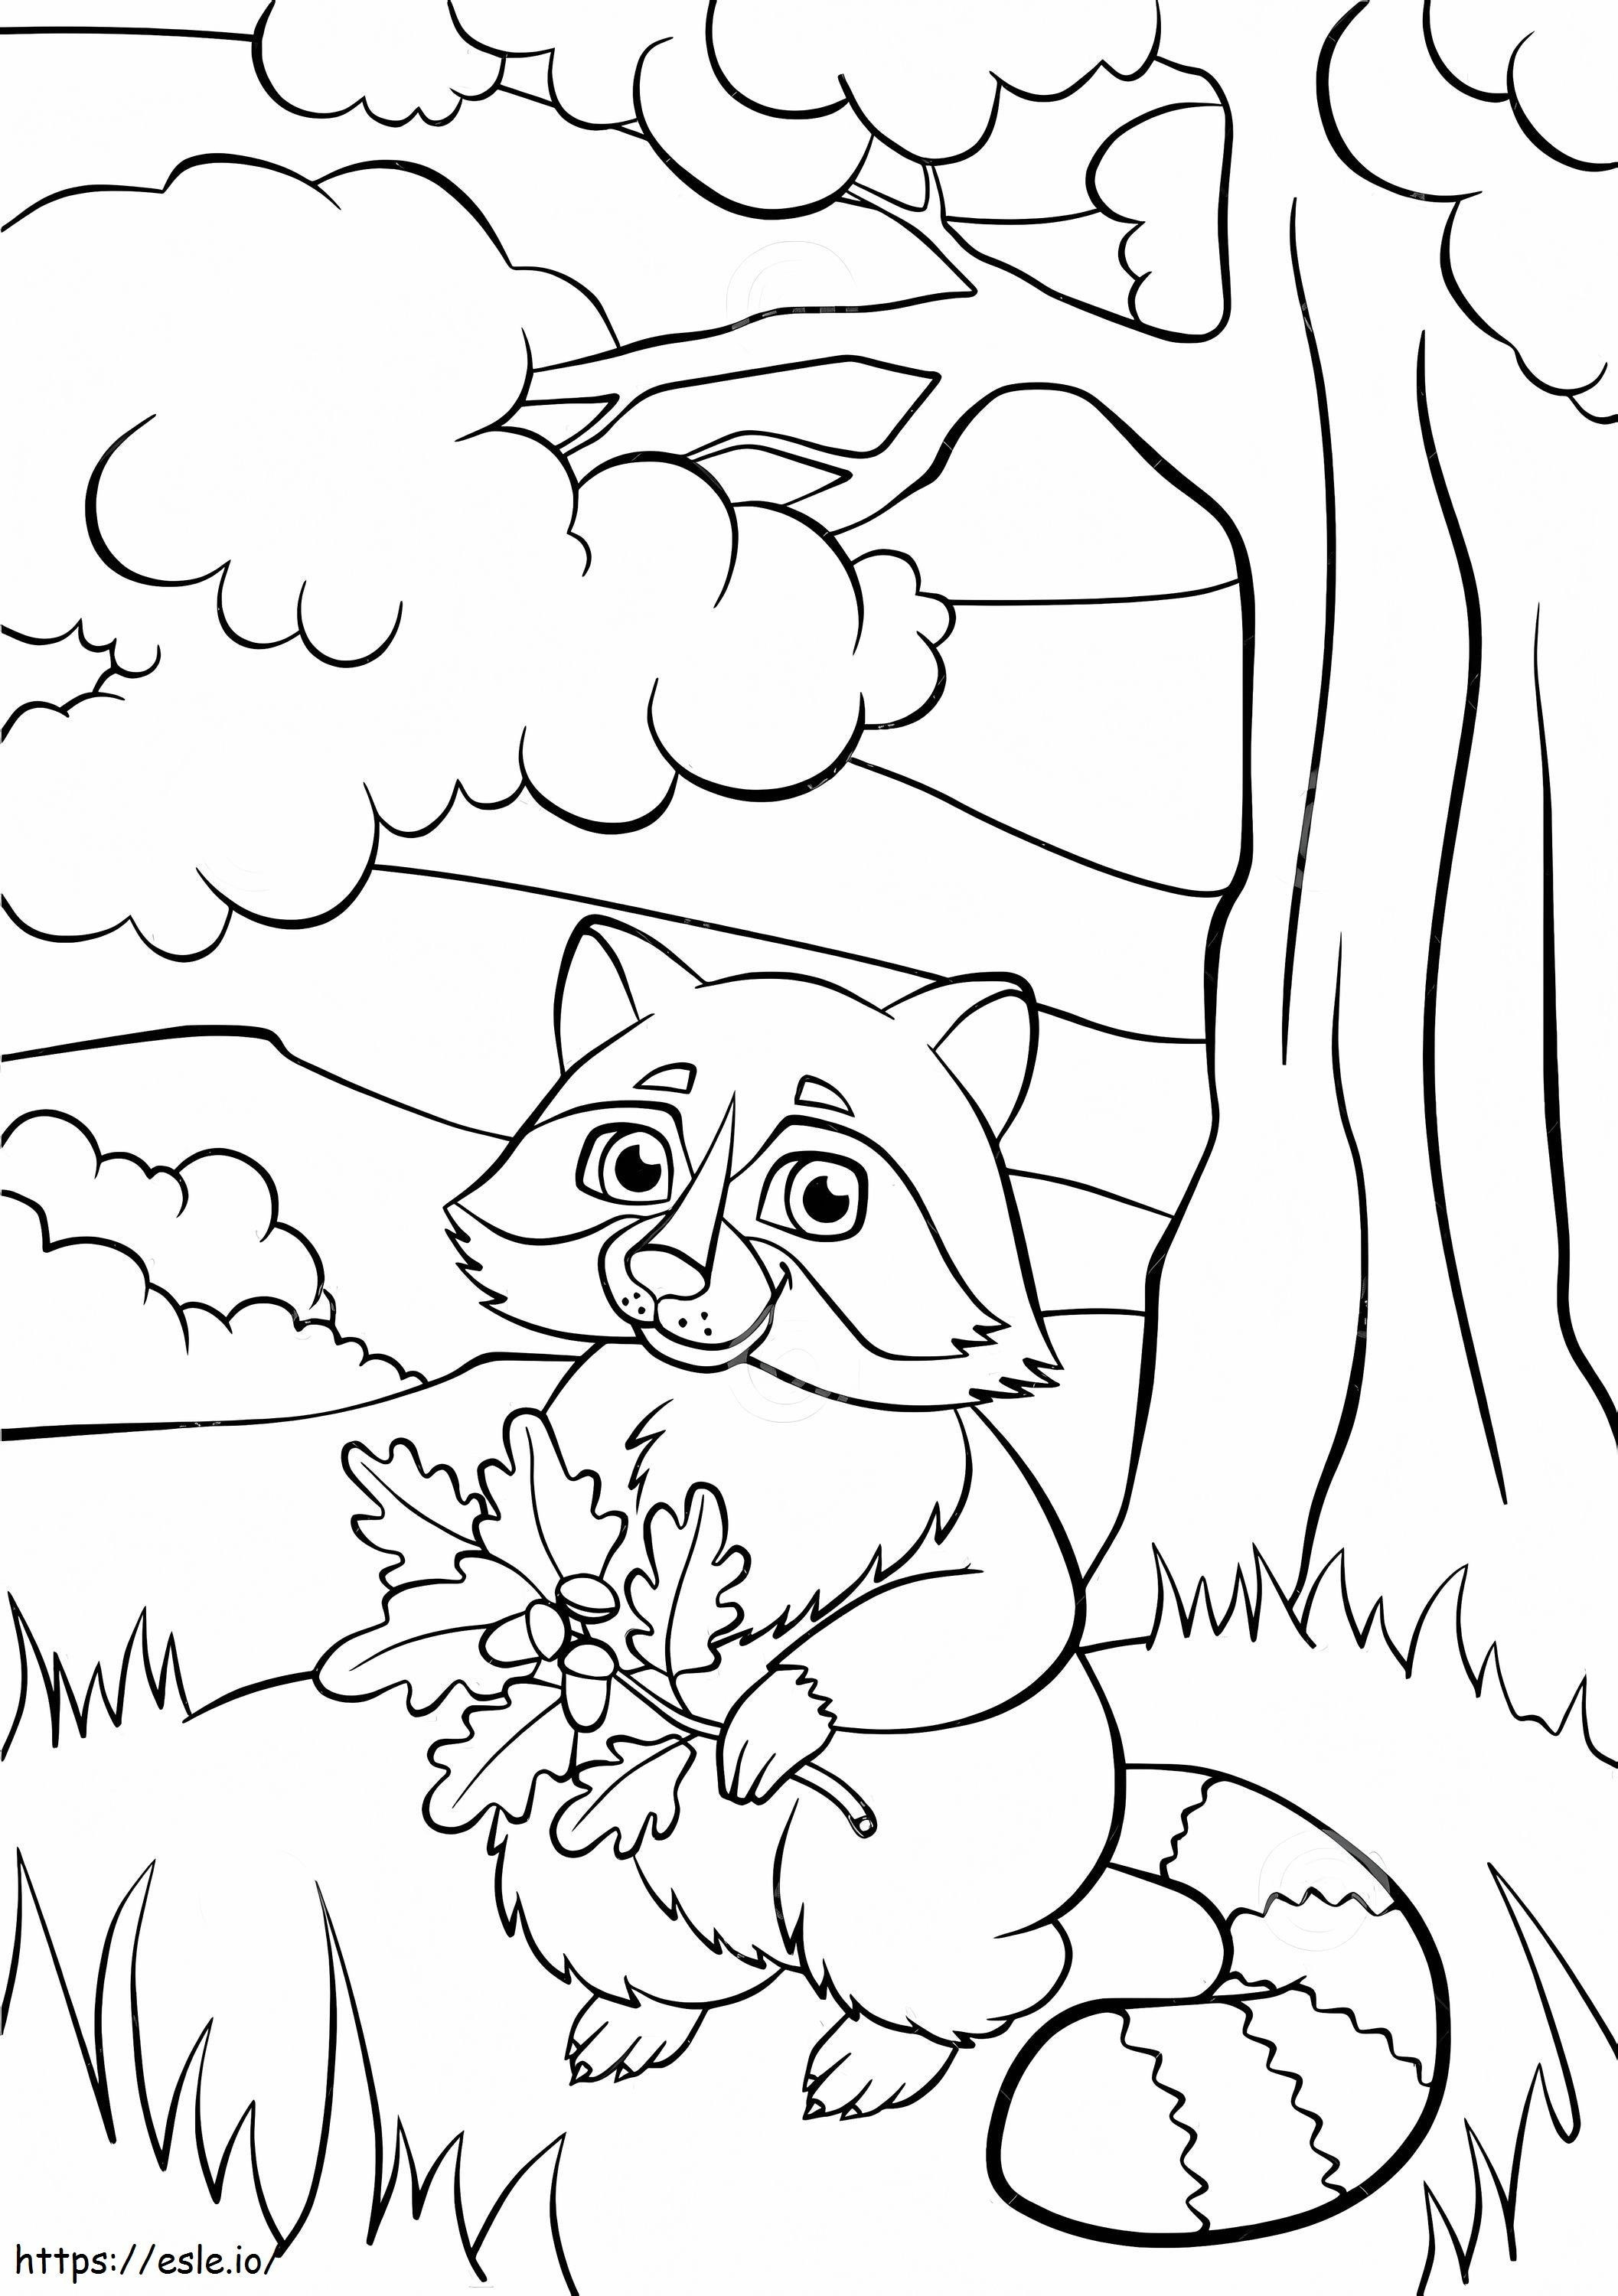 Raccoon Holding Leaf coloring page